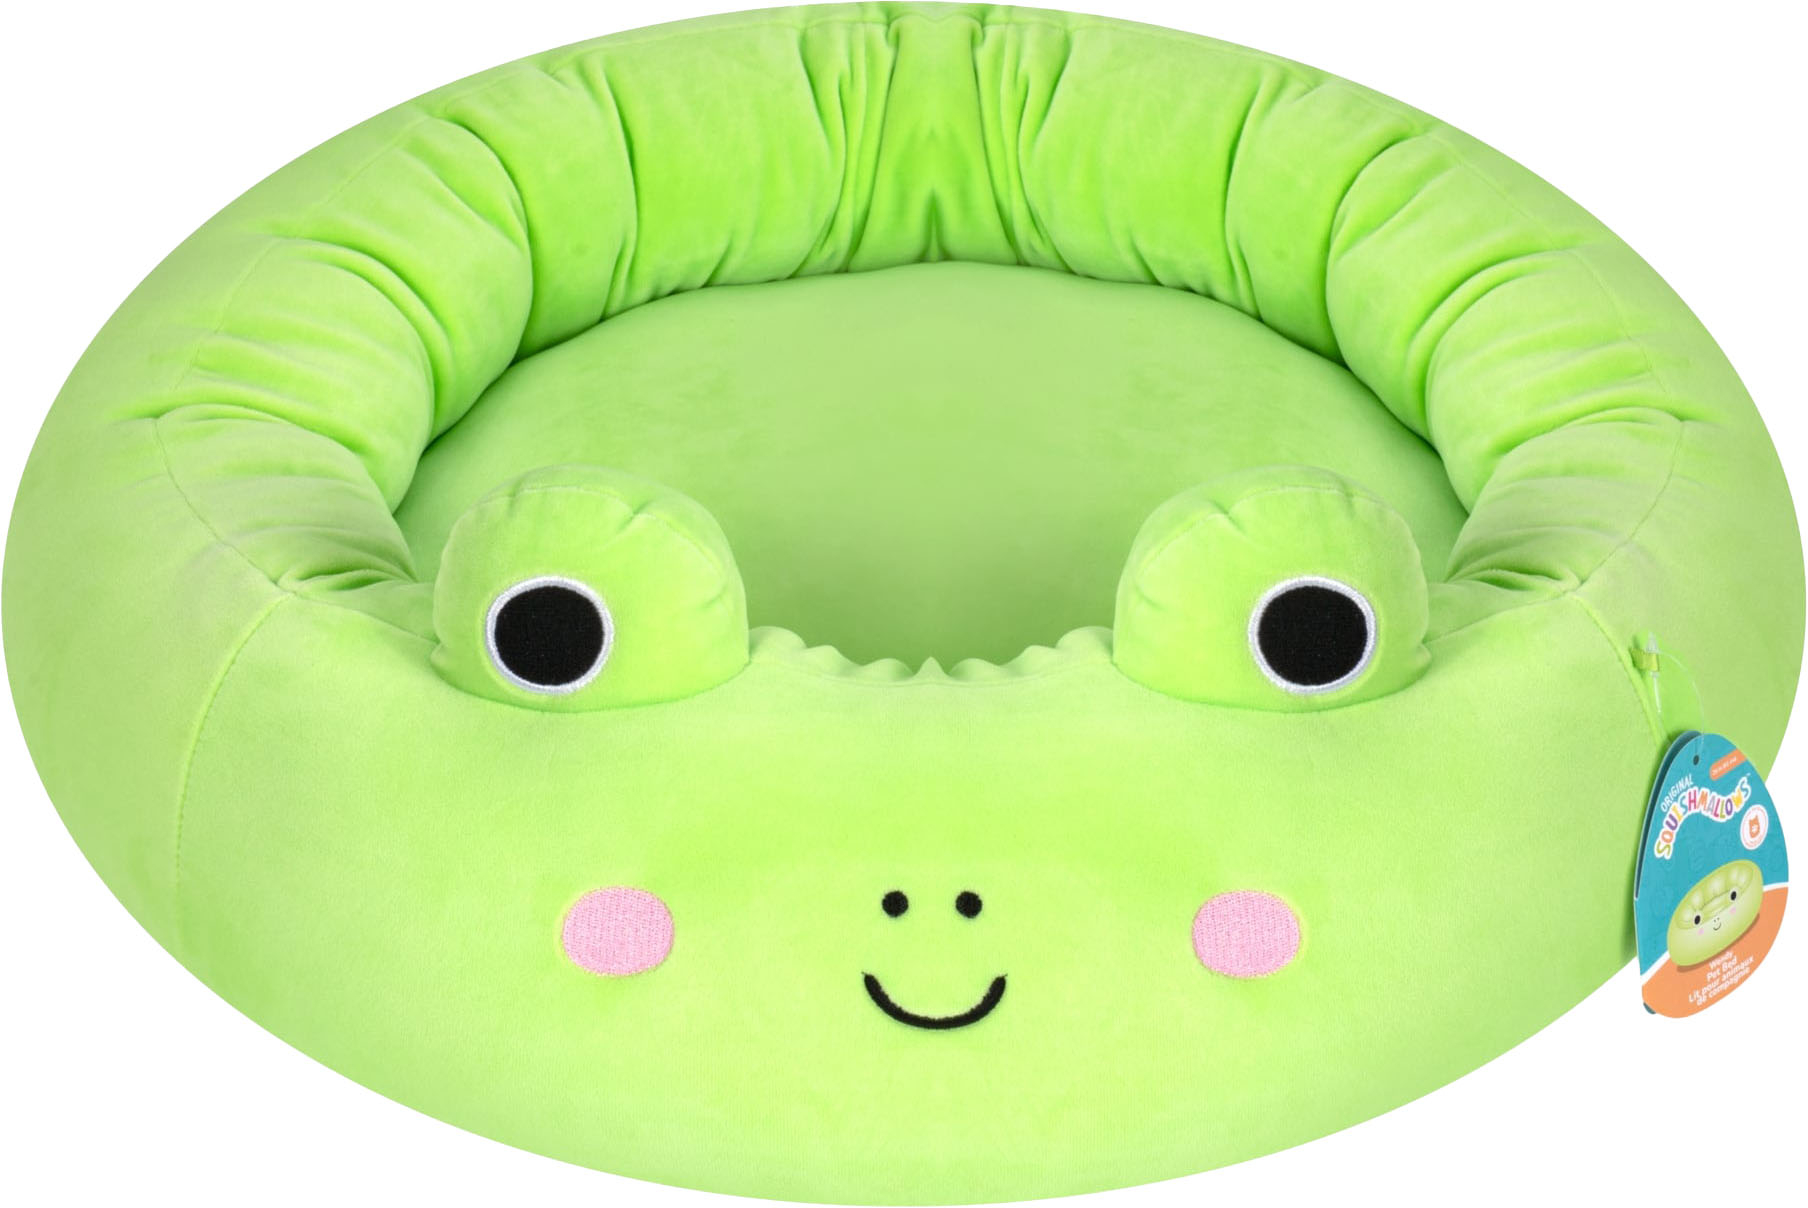 Squishmallows Wendy The Frog Pet Bed - 24 in